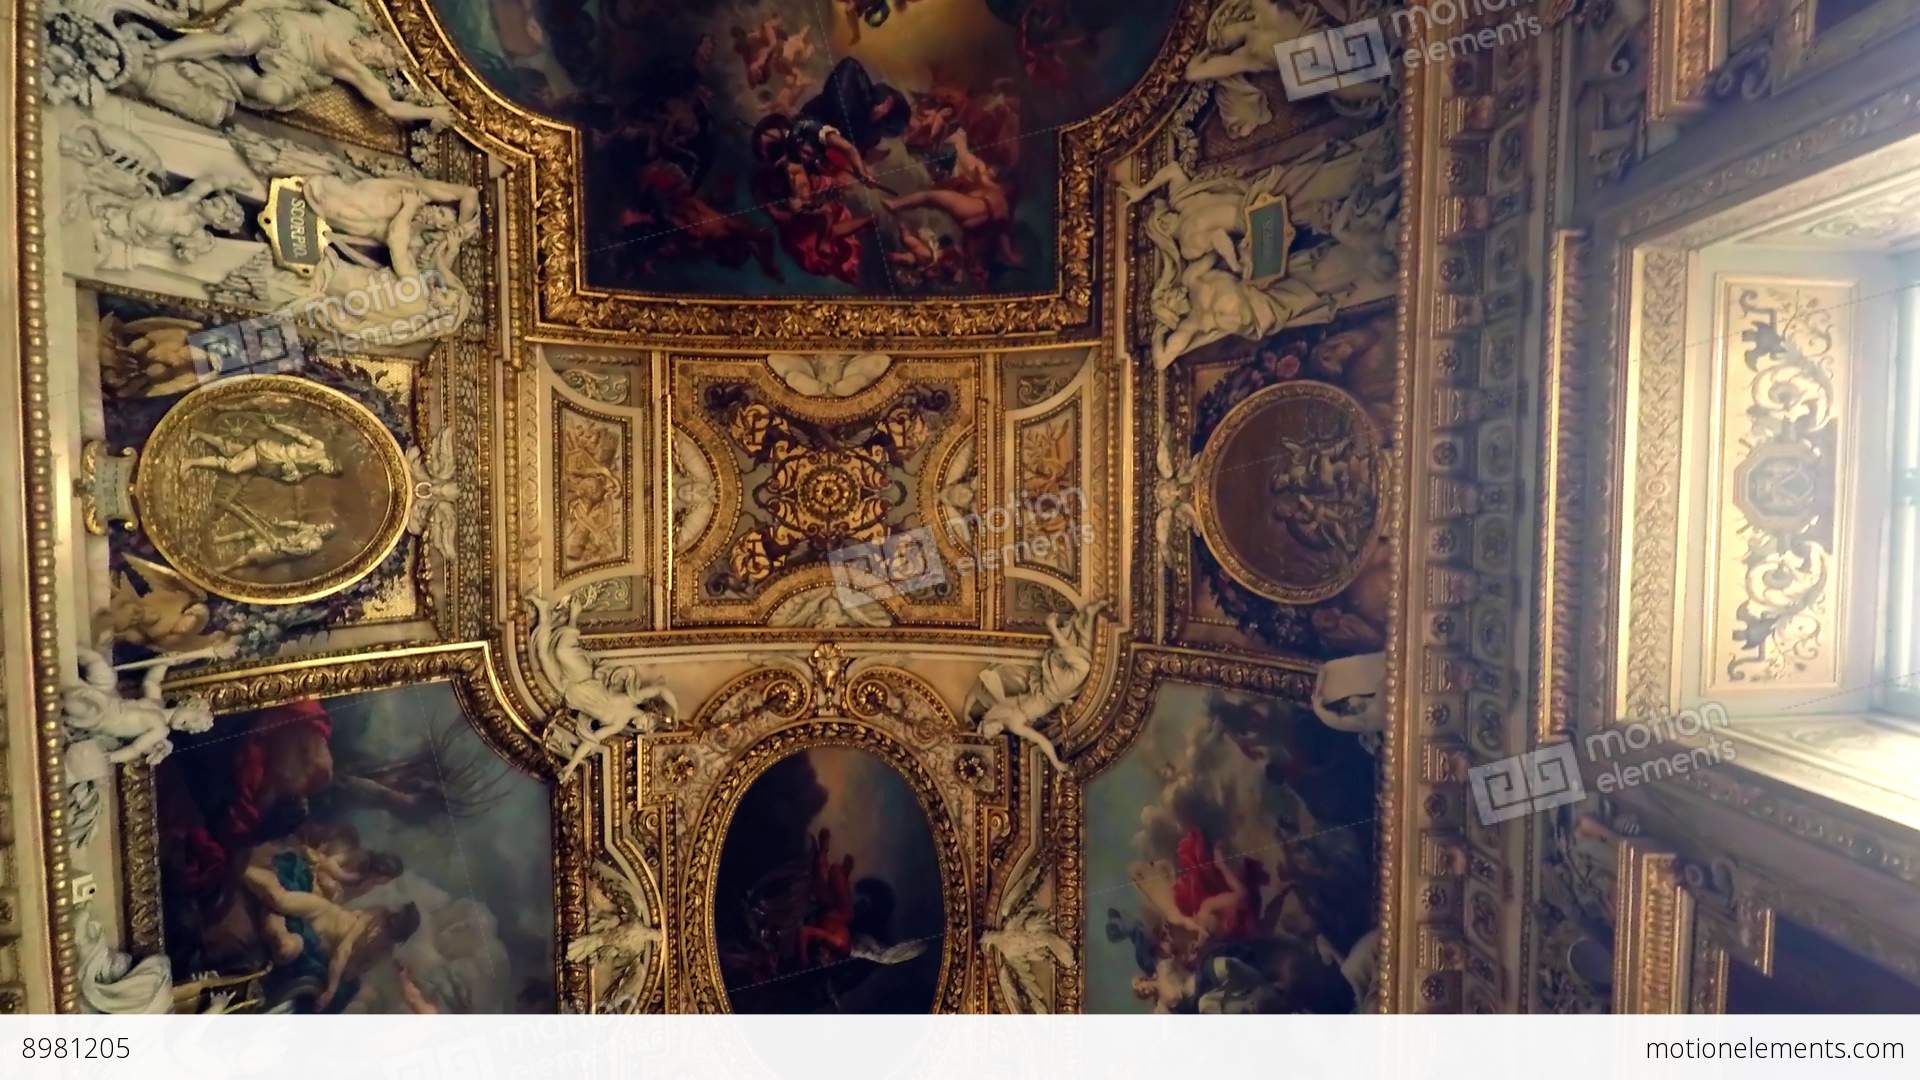 Magnificent Painted Ceilings In The Louvre Museum In Paris. France